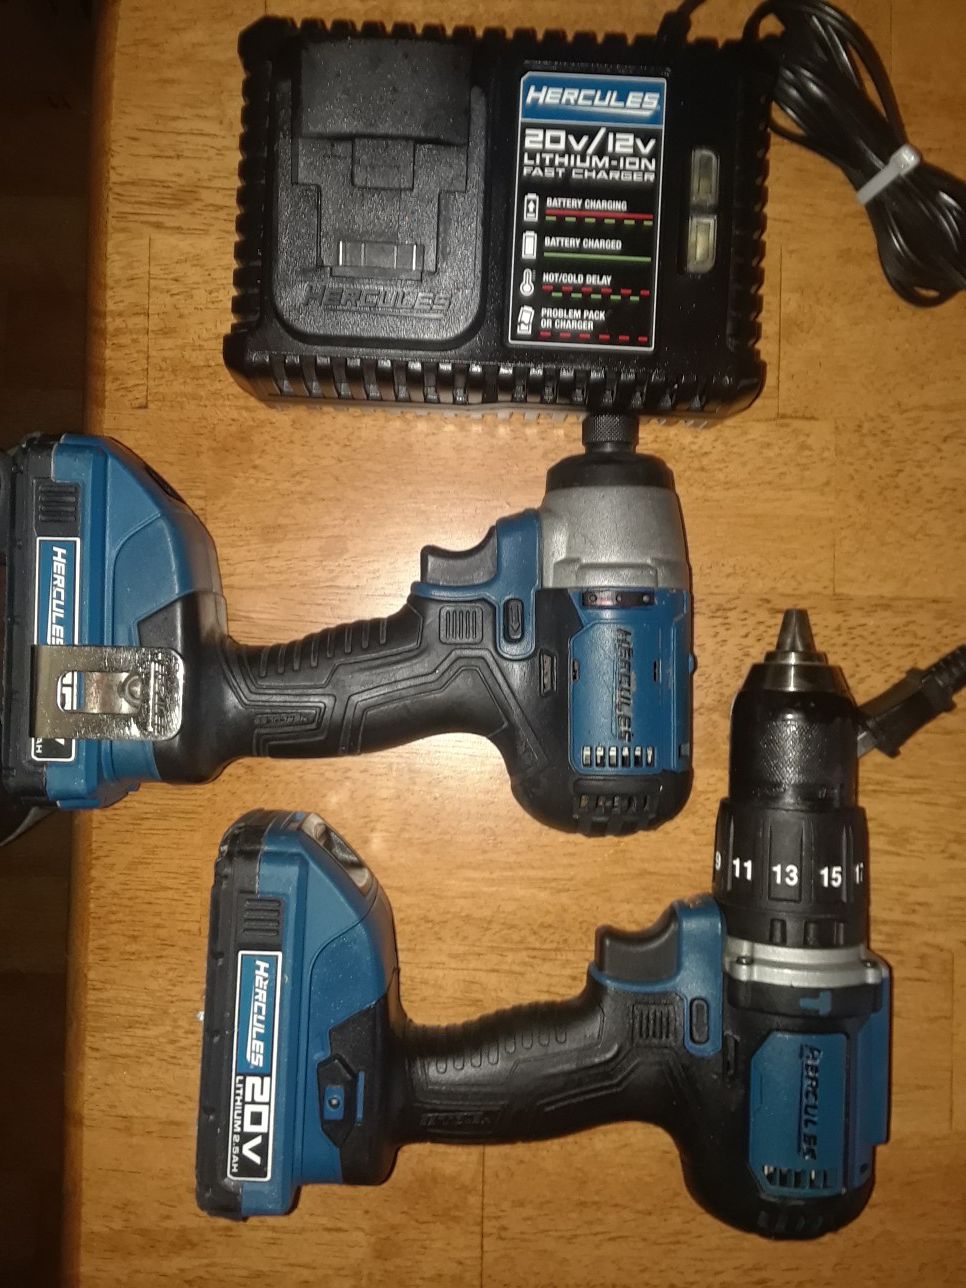 Hercules 20 volt impact driver and hammer drill kit with 2 batteries and charger